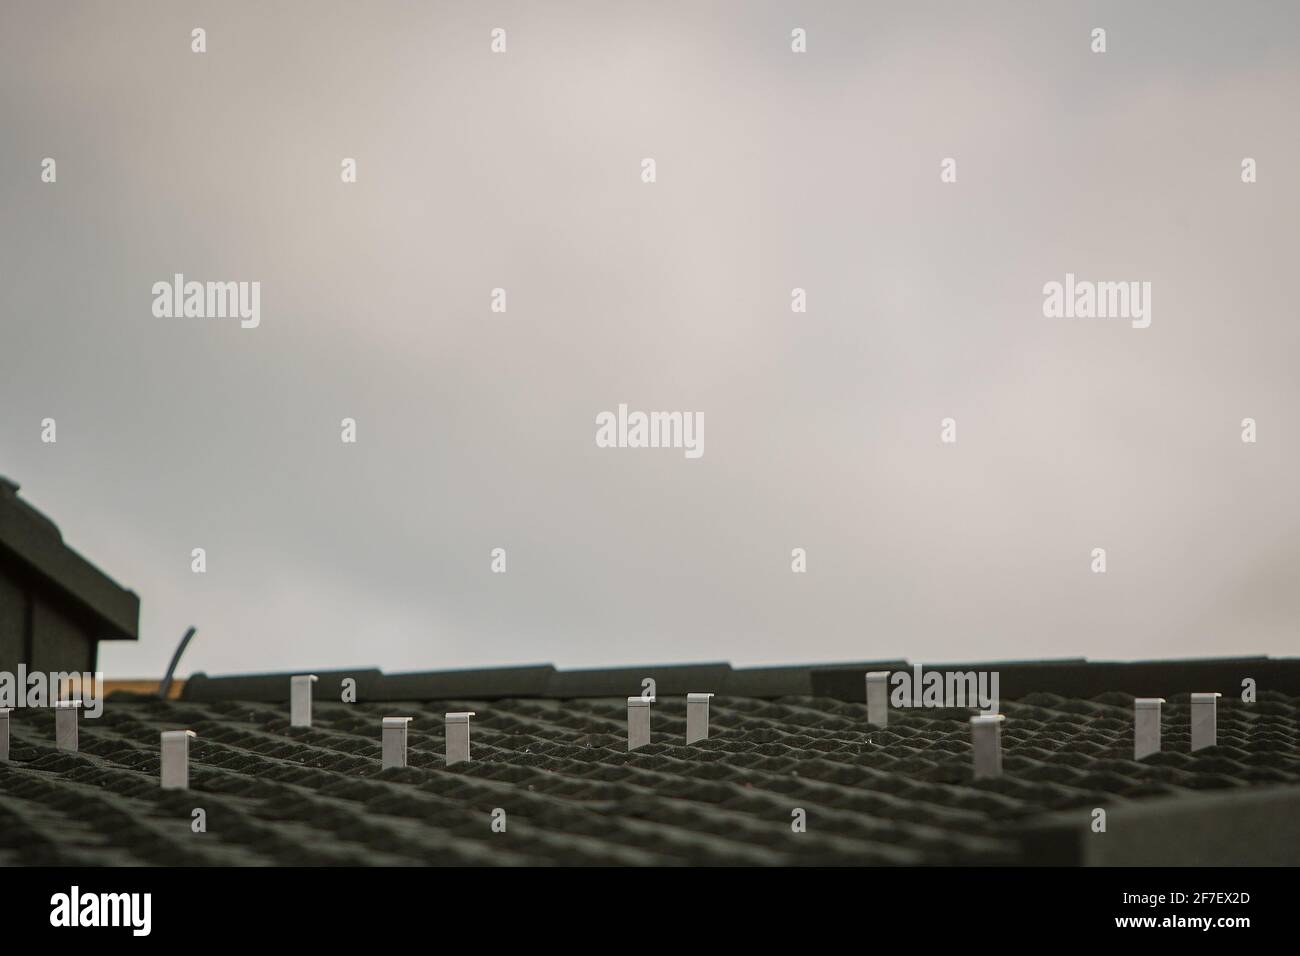 Detail of a domestic electric power plant holders or hangers, fixation points for solar panels. Stock Photo